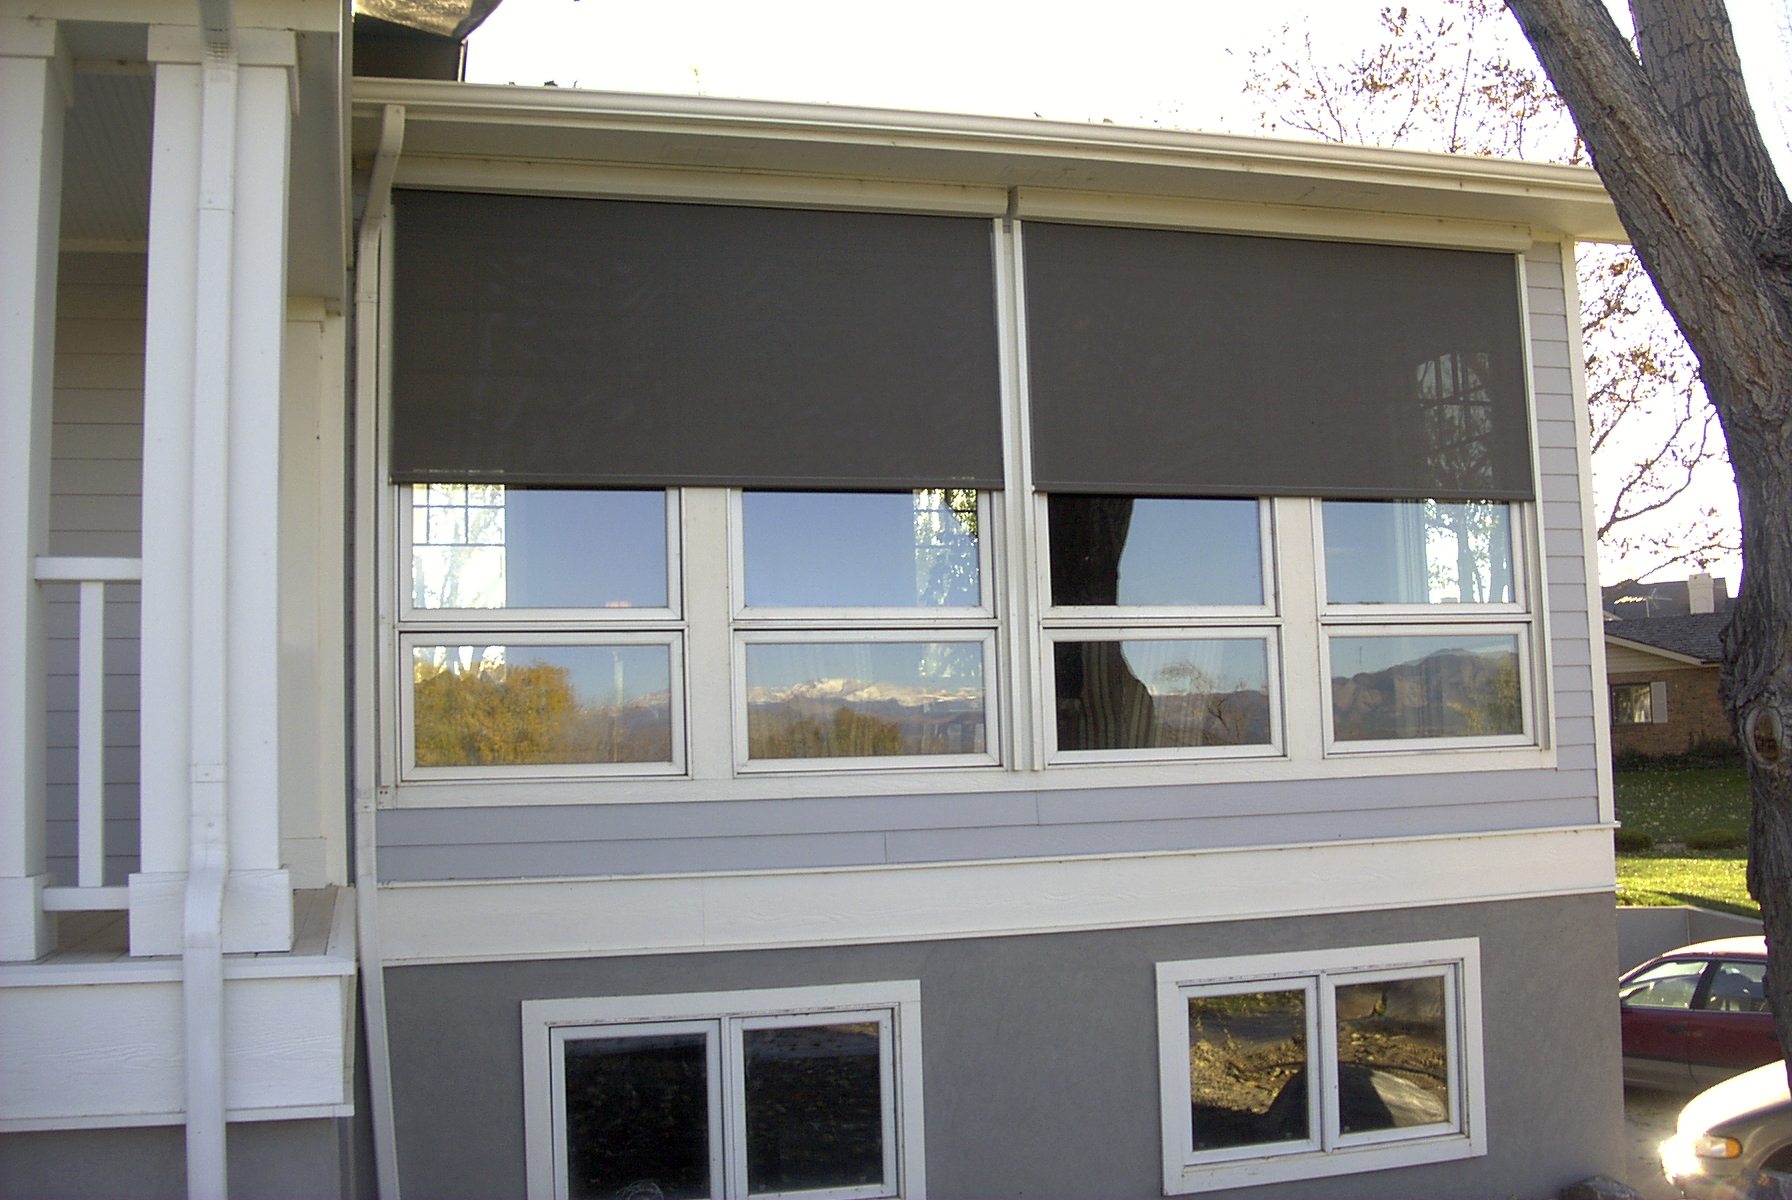 New Exterior Window Screens To Block Sun for Simple Design